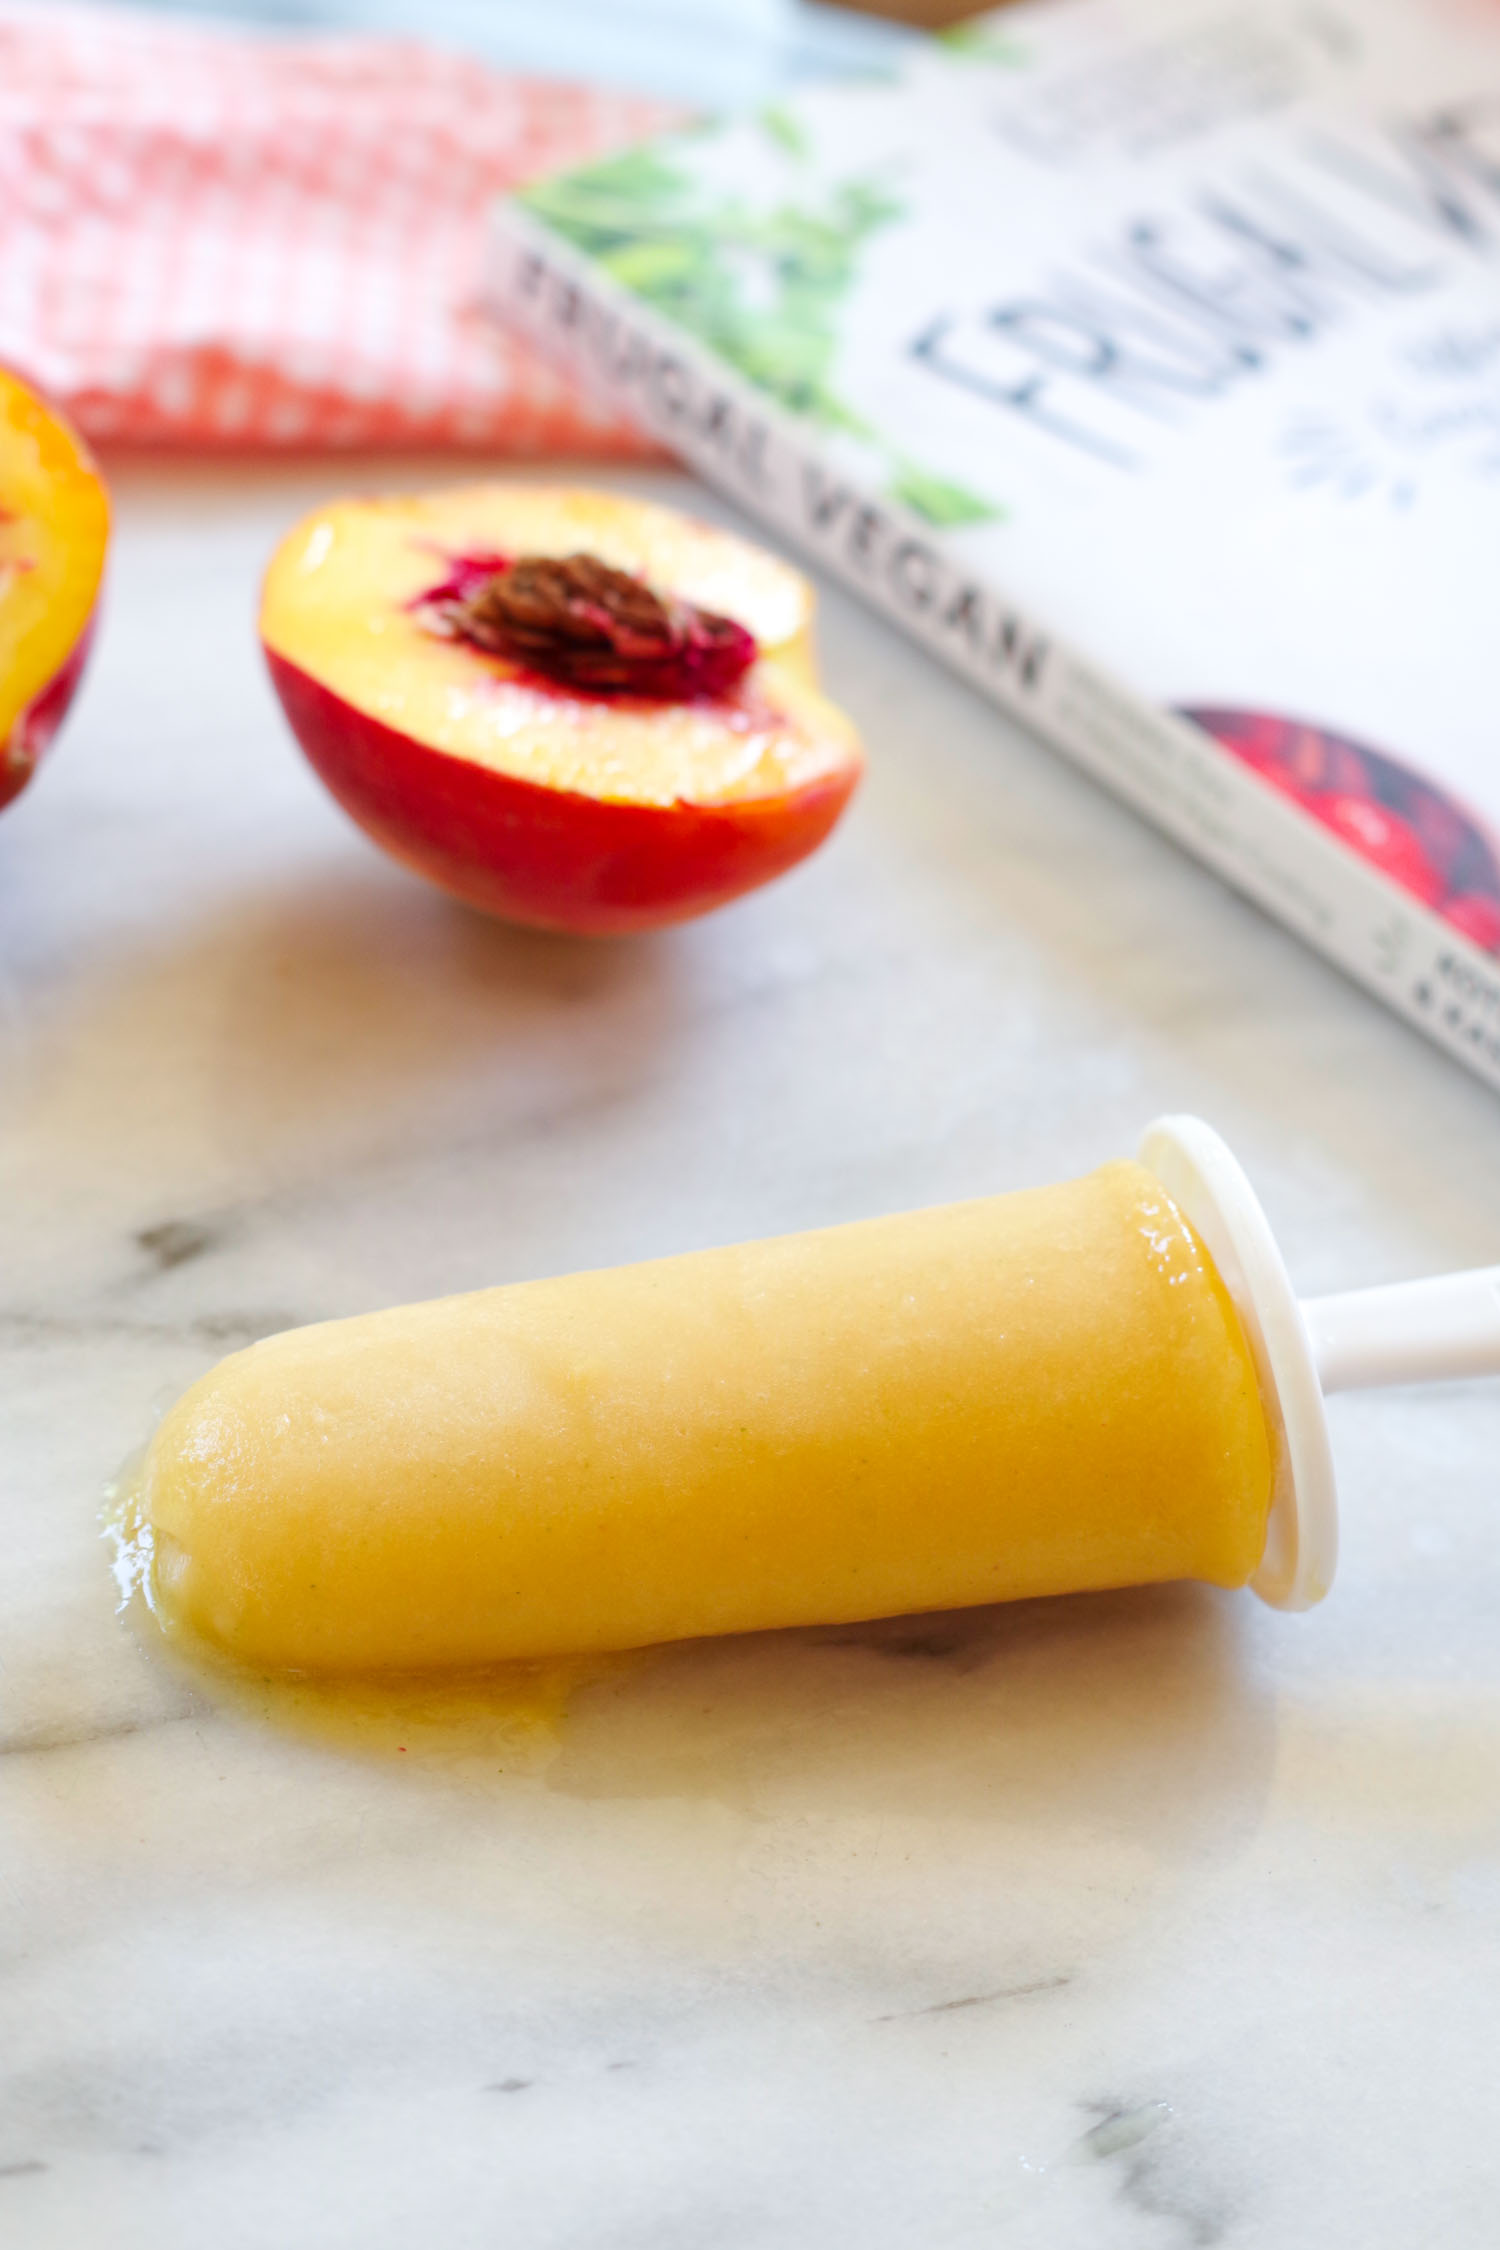 Coconut peach popsicle recipe from the cookbook, Frugal Vegan. Photo by Beautiful Ingredient.